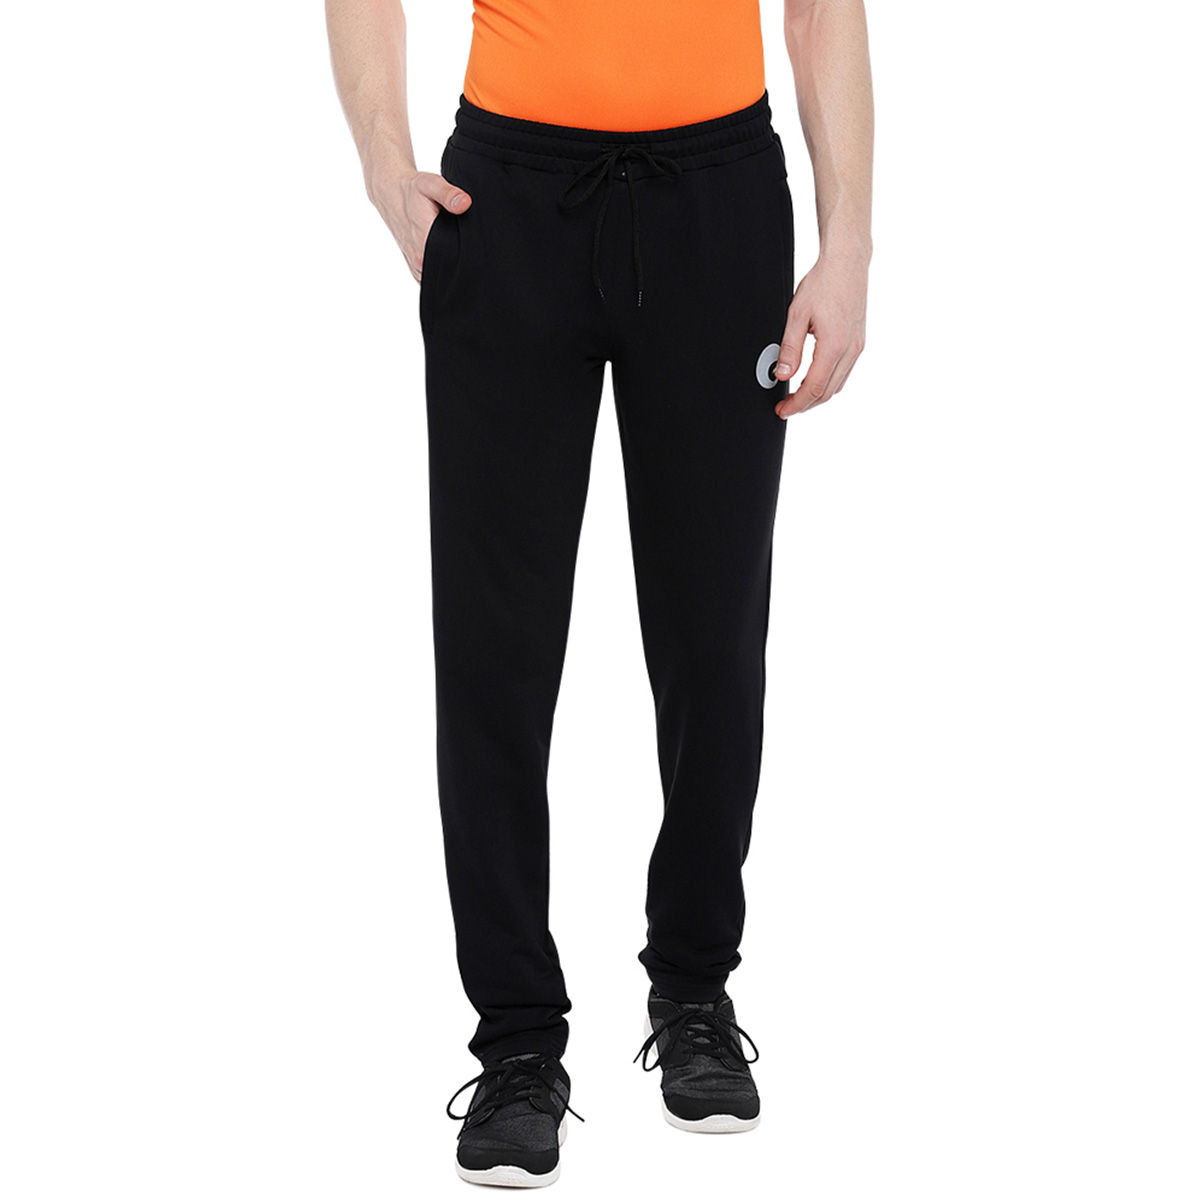 Cricket Track Pants Online Shopping - JW Cricket Whites Trousers